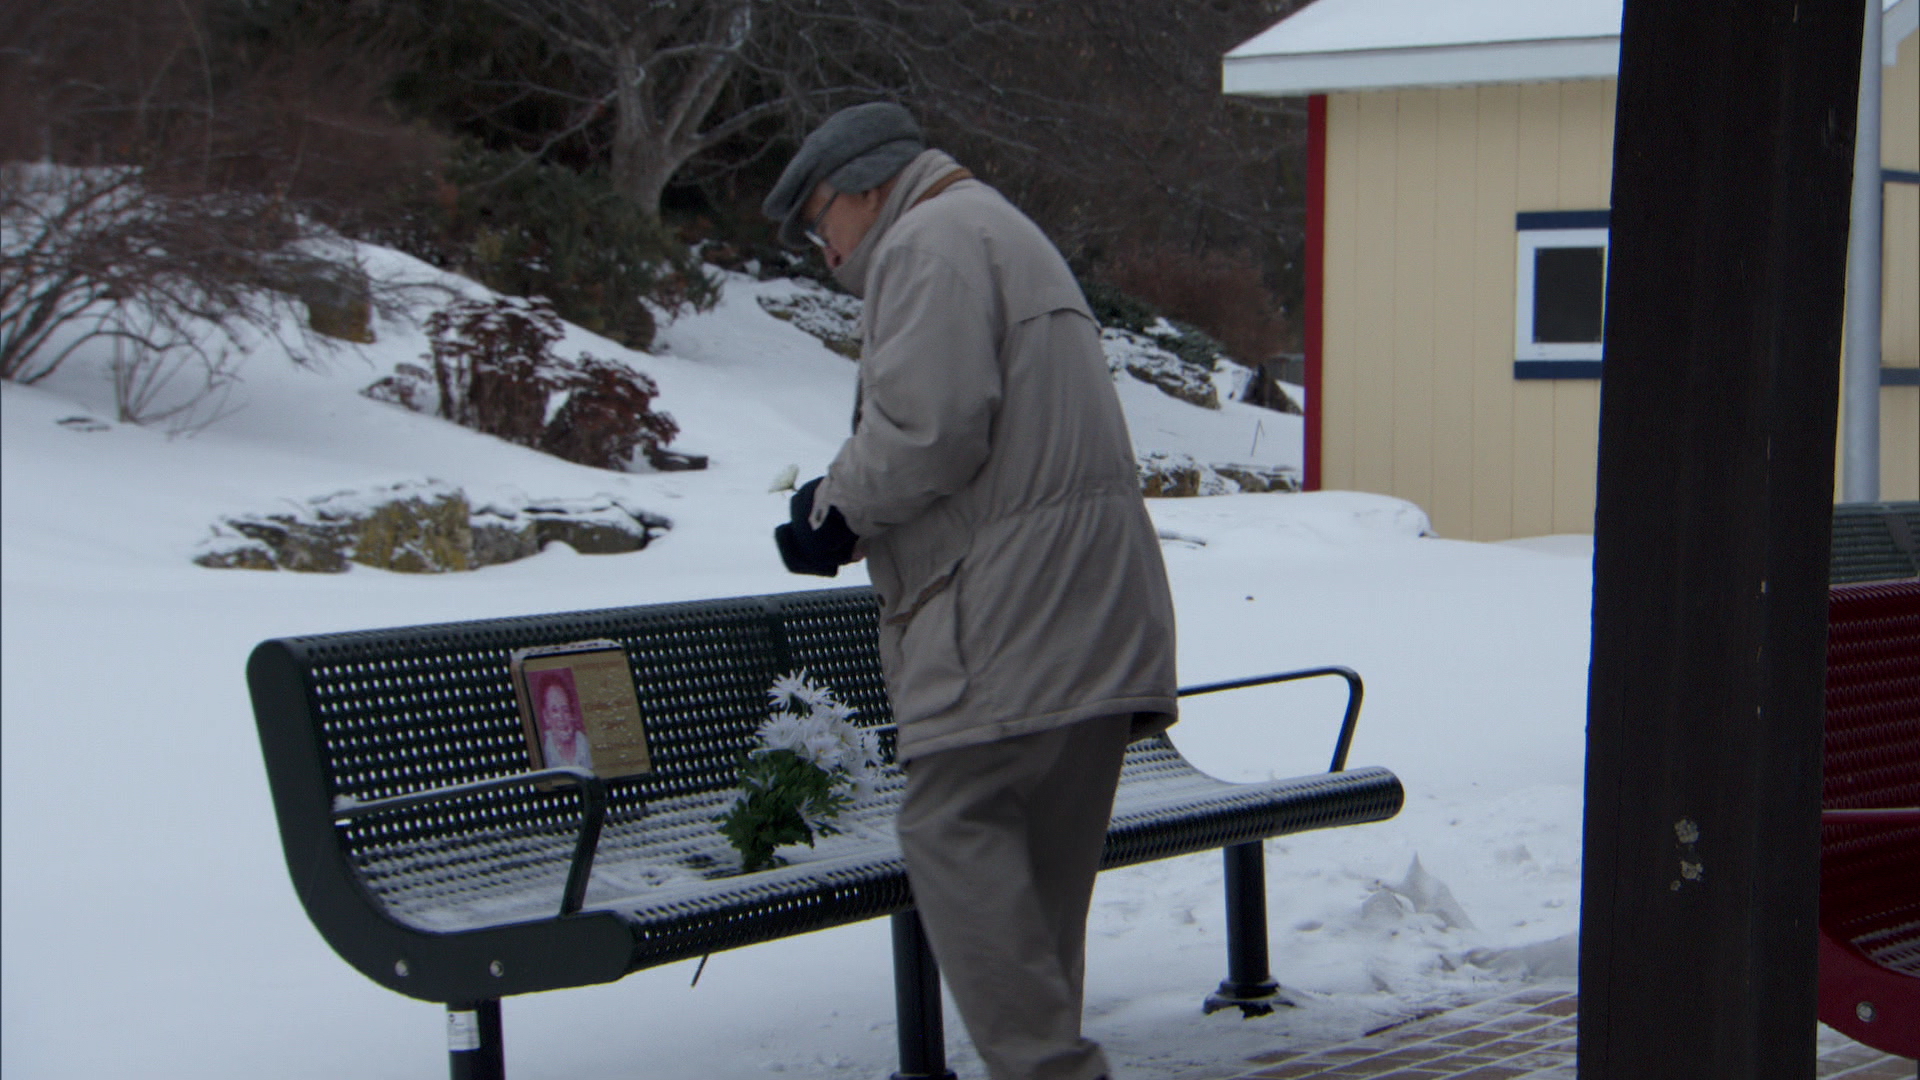 2 Strangers Secretly Cleared Snow All Winter So Elderly Man Could Reach His Late Wife’s Memorial